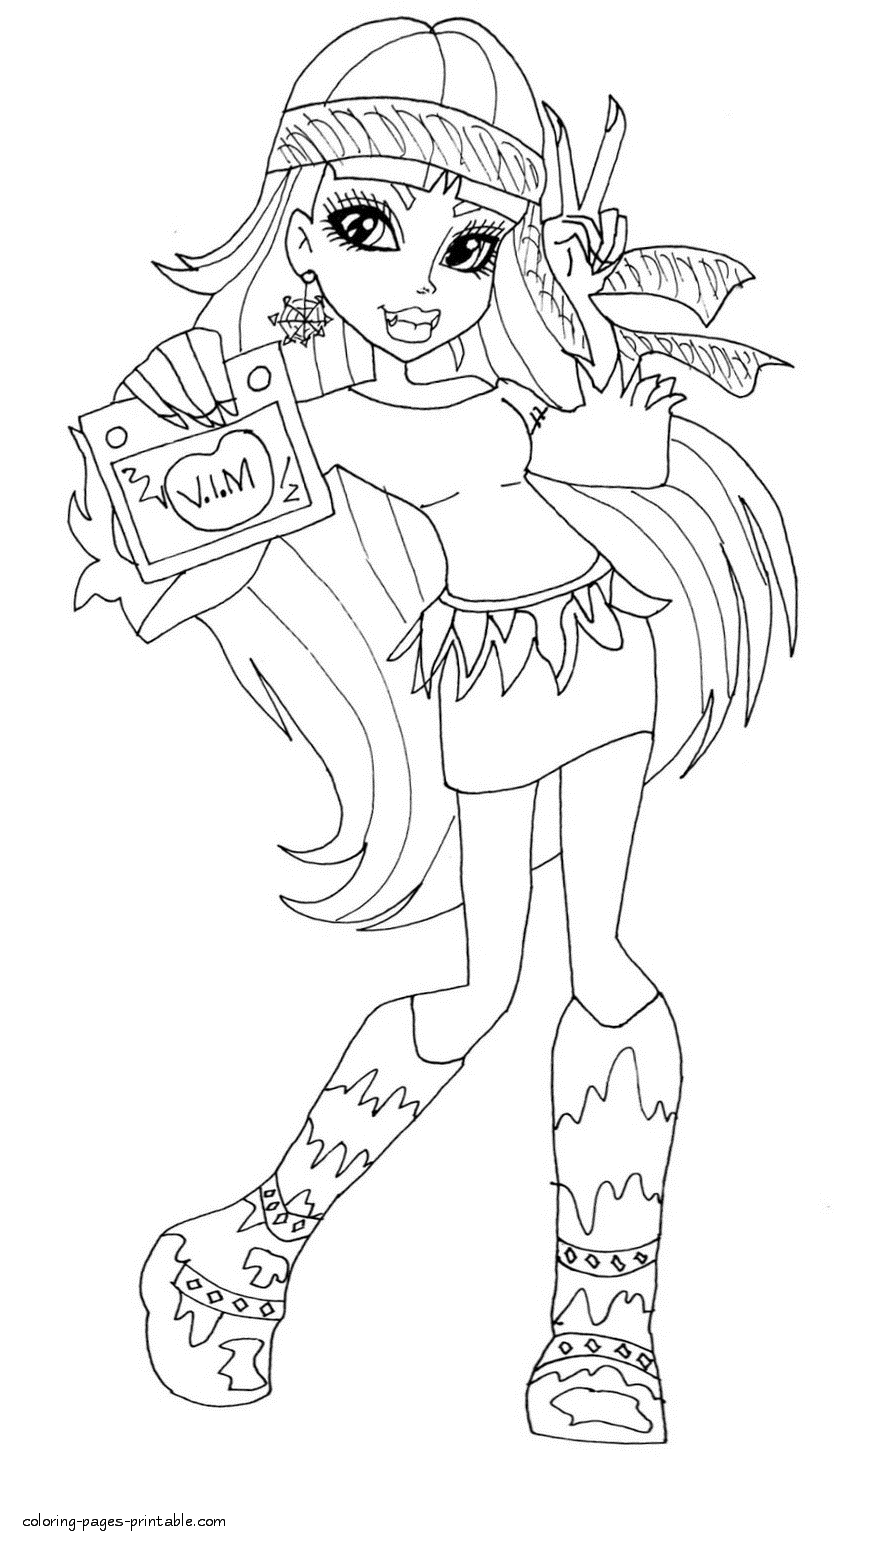 Monster High characters coloring pages to print. Abbey Bominable